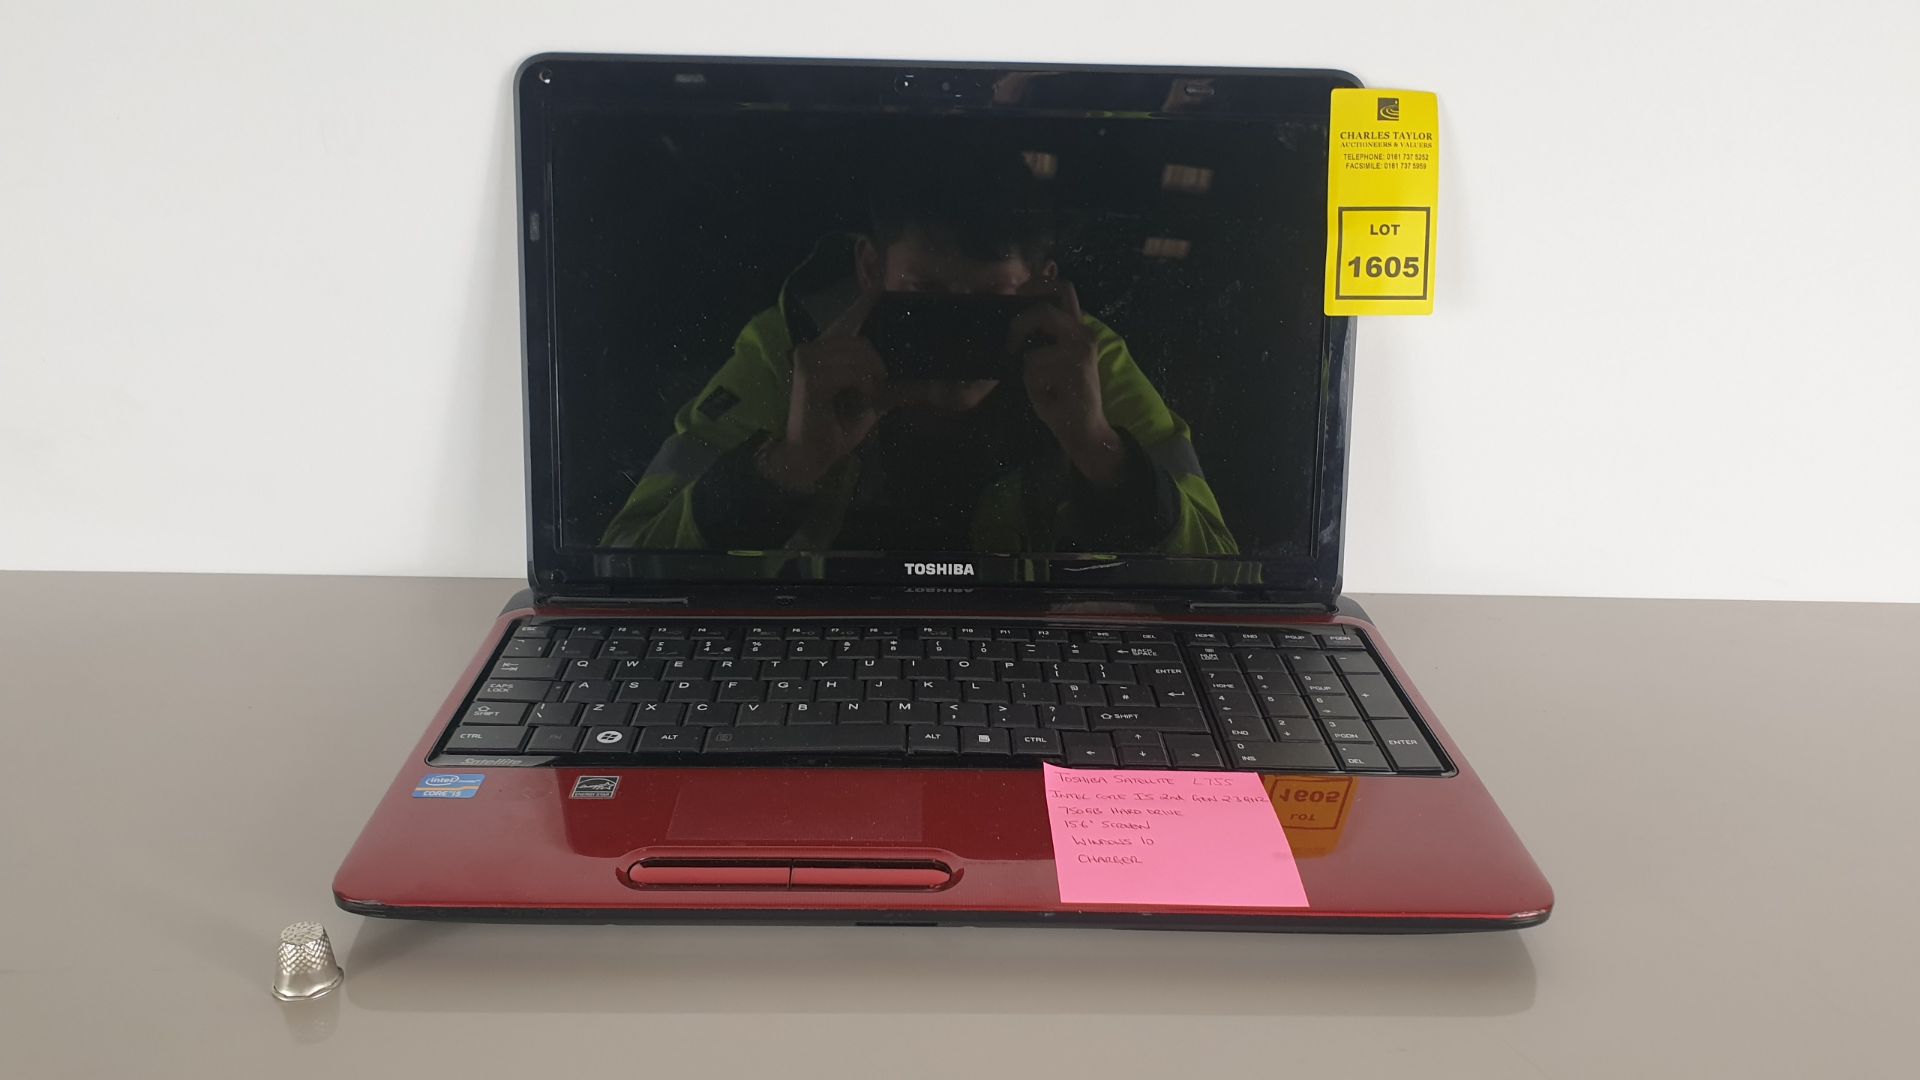 (LOT FOR THURSDAY 28TH MAY AUCTION) TOSHIBA SATELLITE L755 LAPTOP - INTEL CORE I5 2ND GEN 2.3